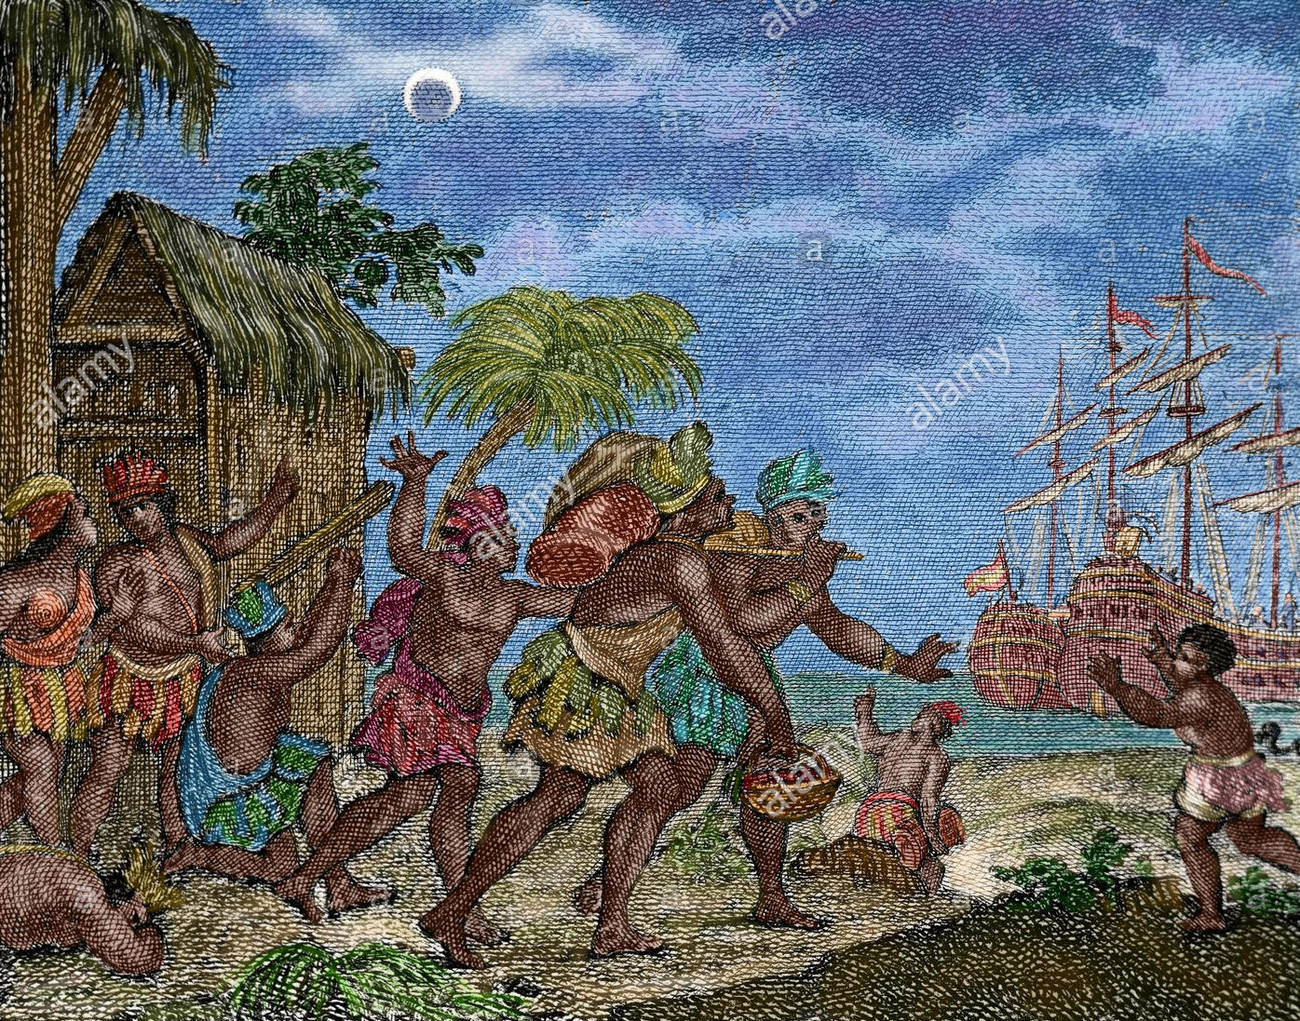 Christopher Columbus with native americans Giamaica